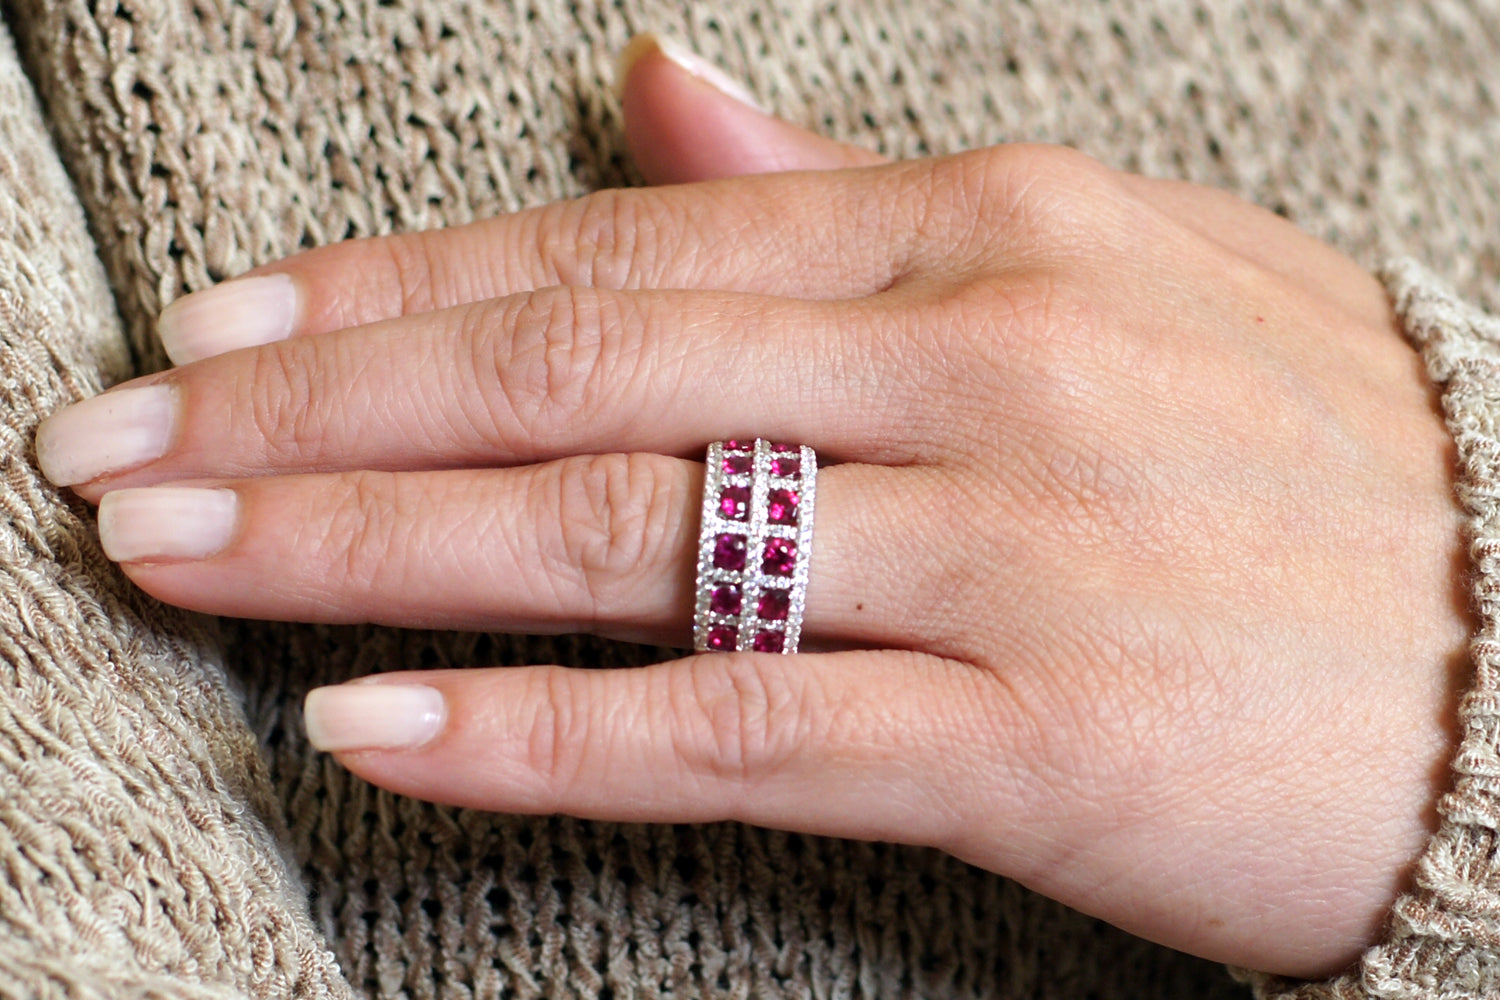 The Claudette Ruby Ring